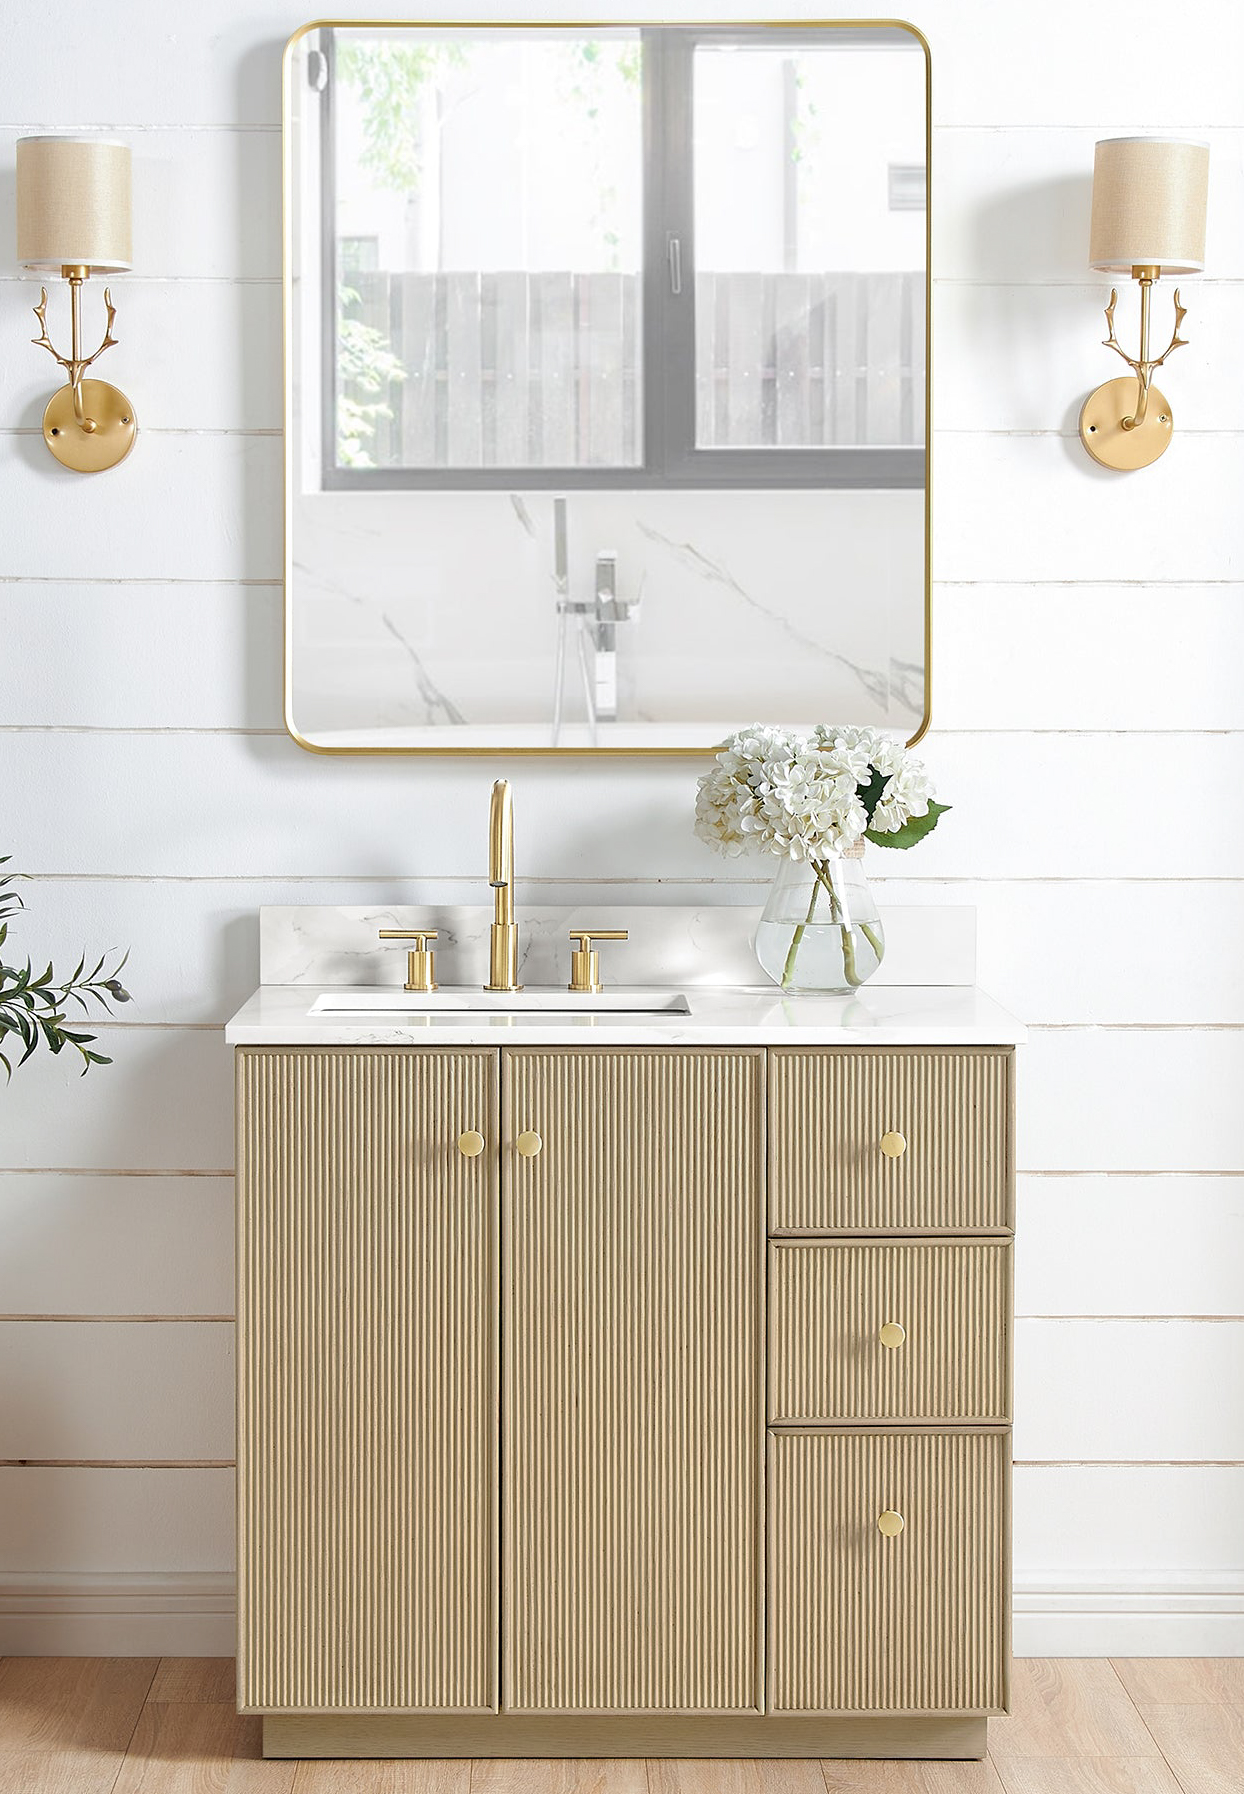 Issac Edwards 36" Free-standing Single Bath Vanity in Aged Dark Brown Oak with Fish Maw White Quartz Stone Top and Mirror